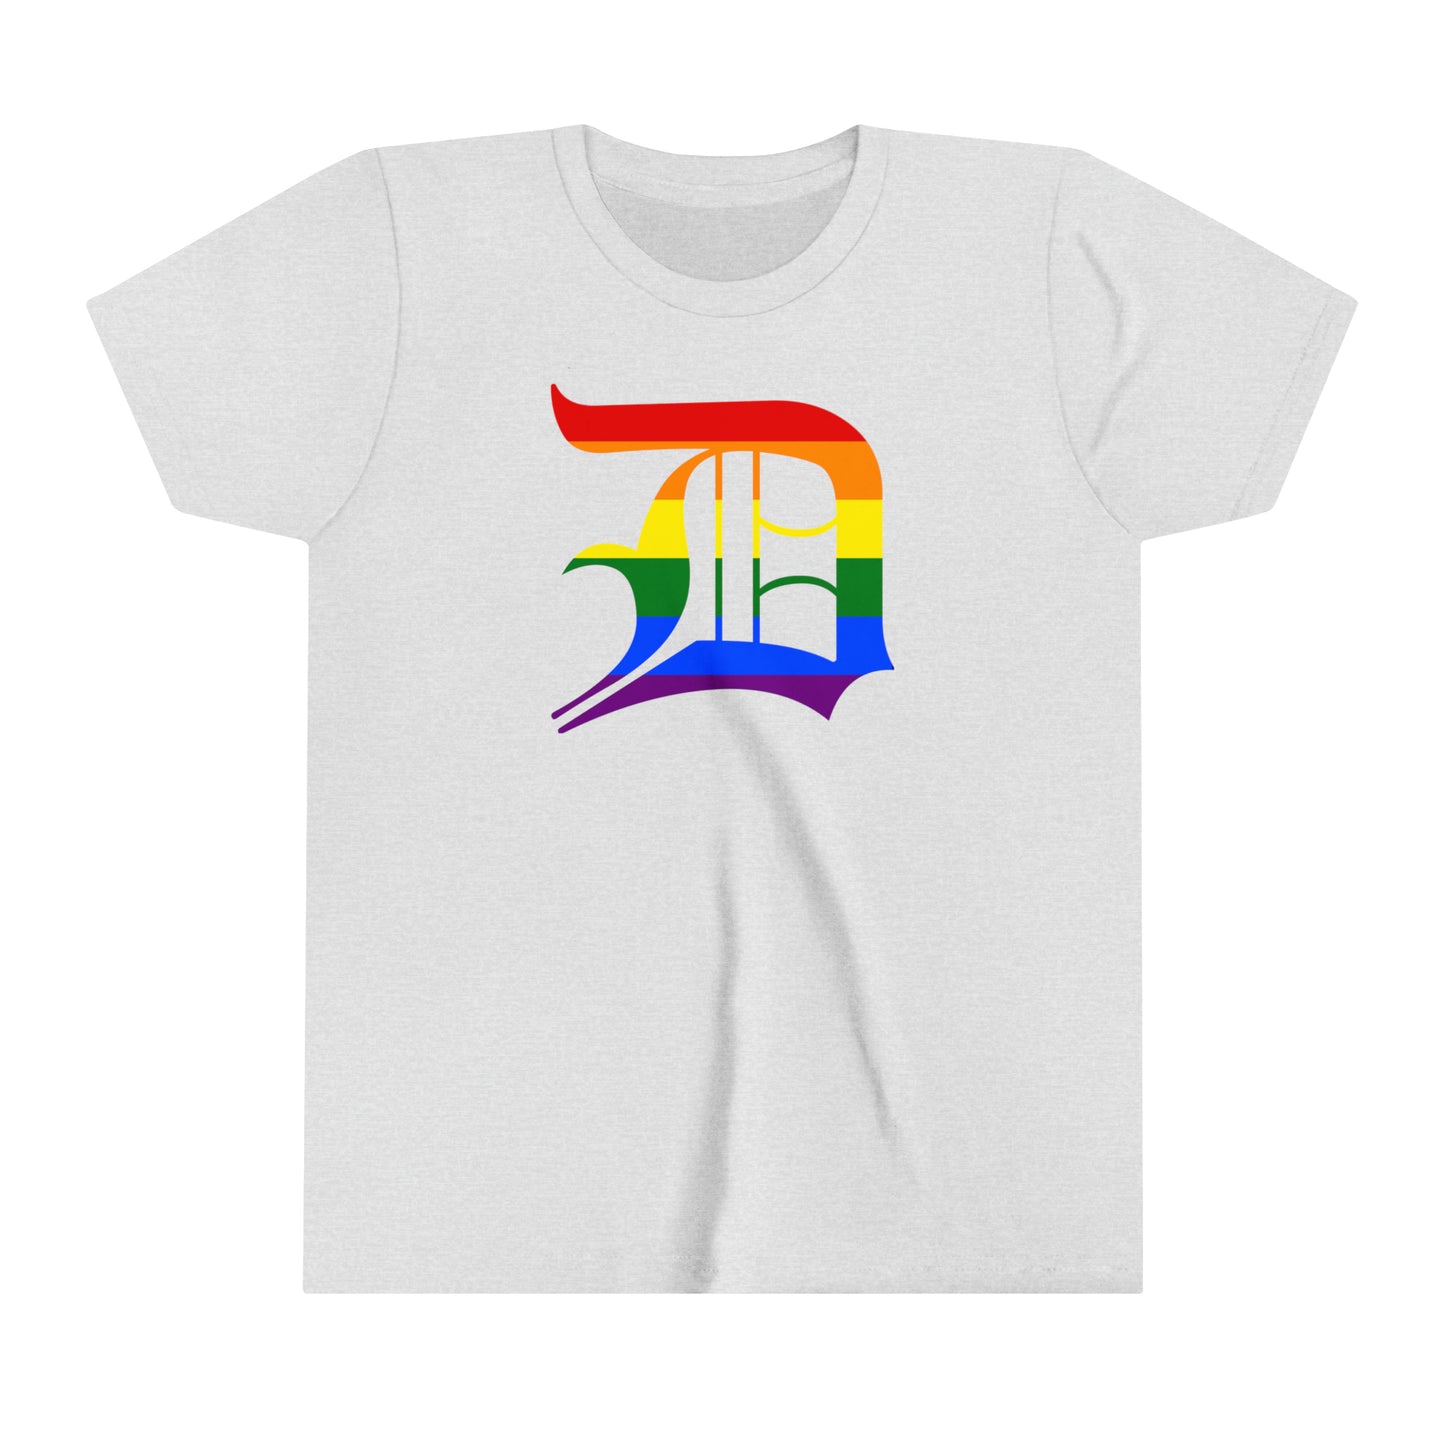 Detroit 'Old English D' T-Shirt (Rainbow Pride Edition) | Youth Short Sleeve